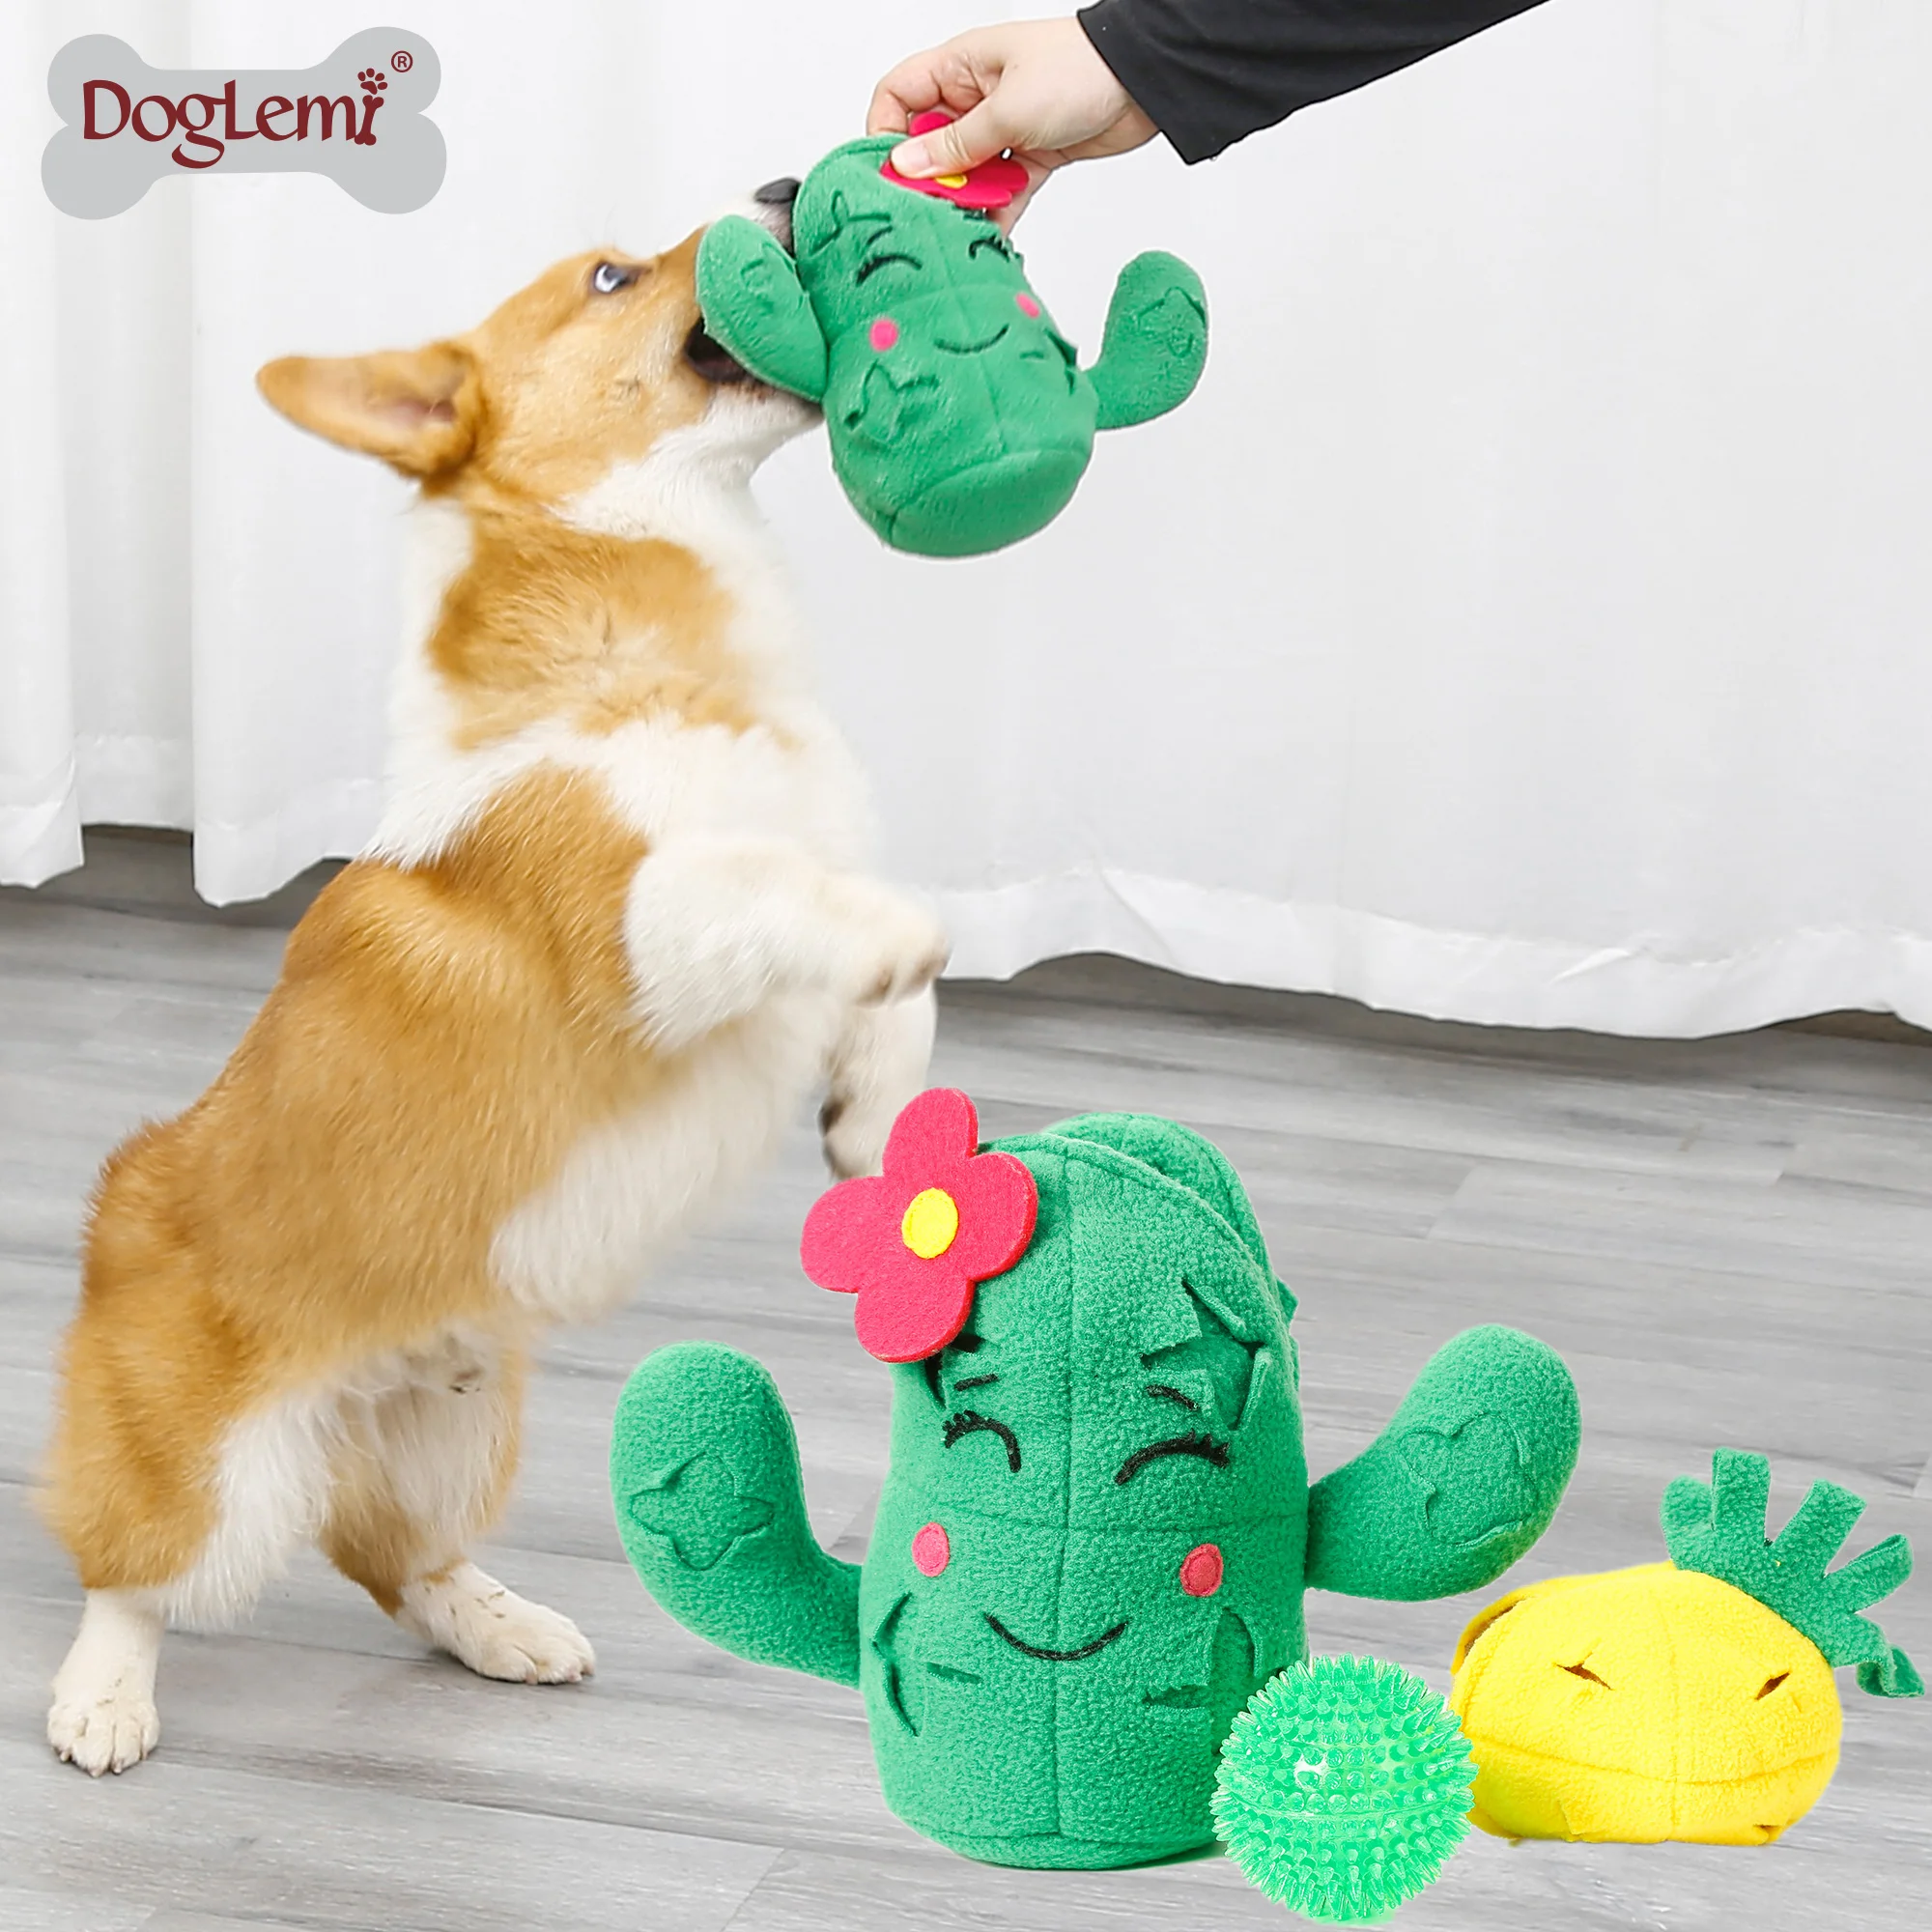 Dog toys 3 in 1 Cactus with Pineapple Ball Designer Dog Toys IQ